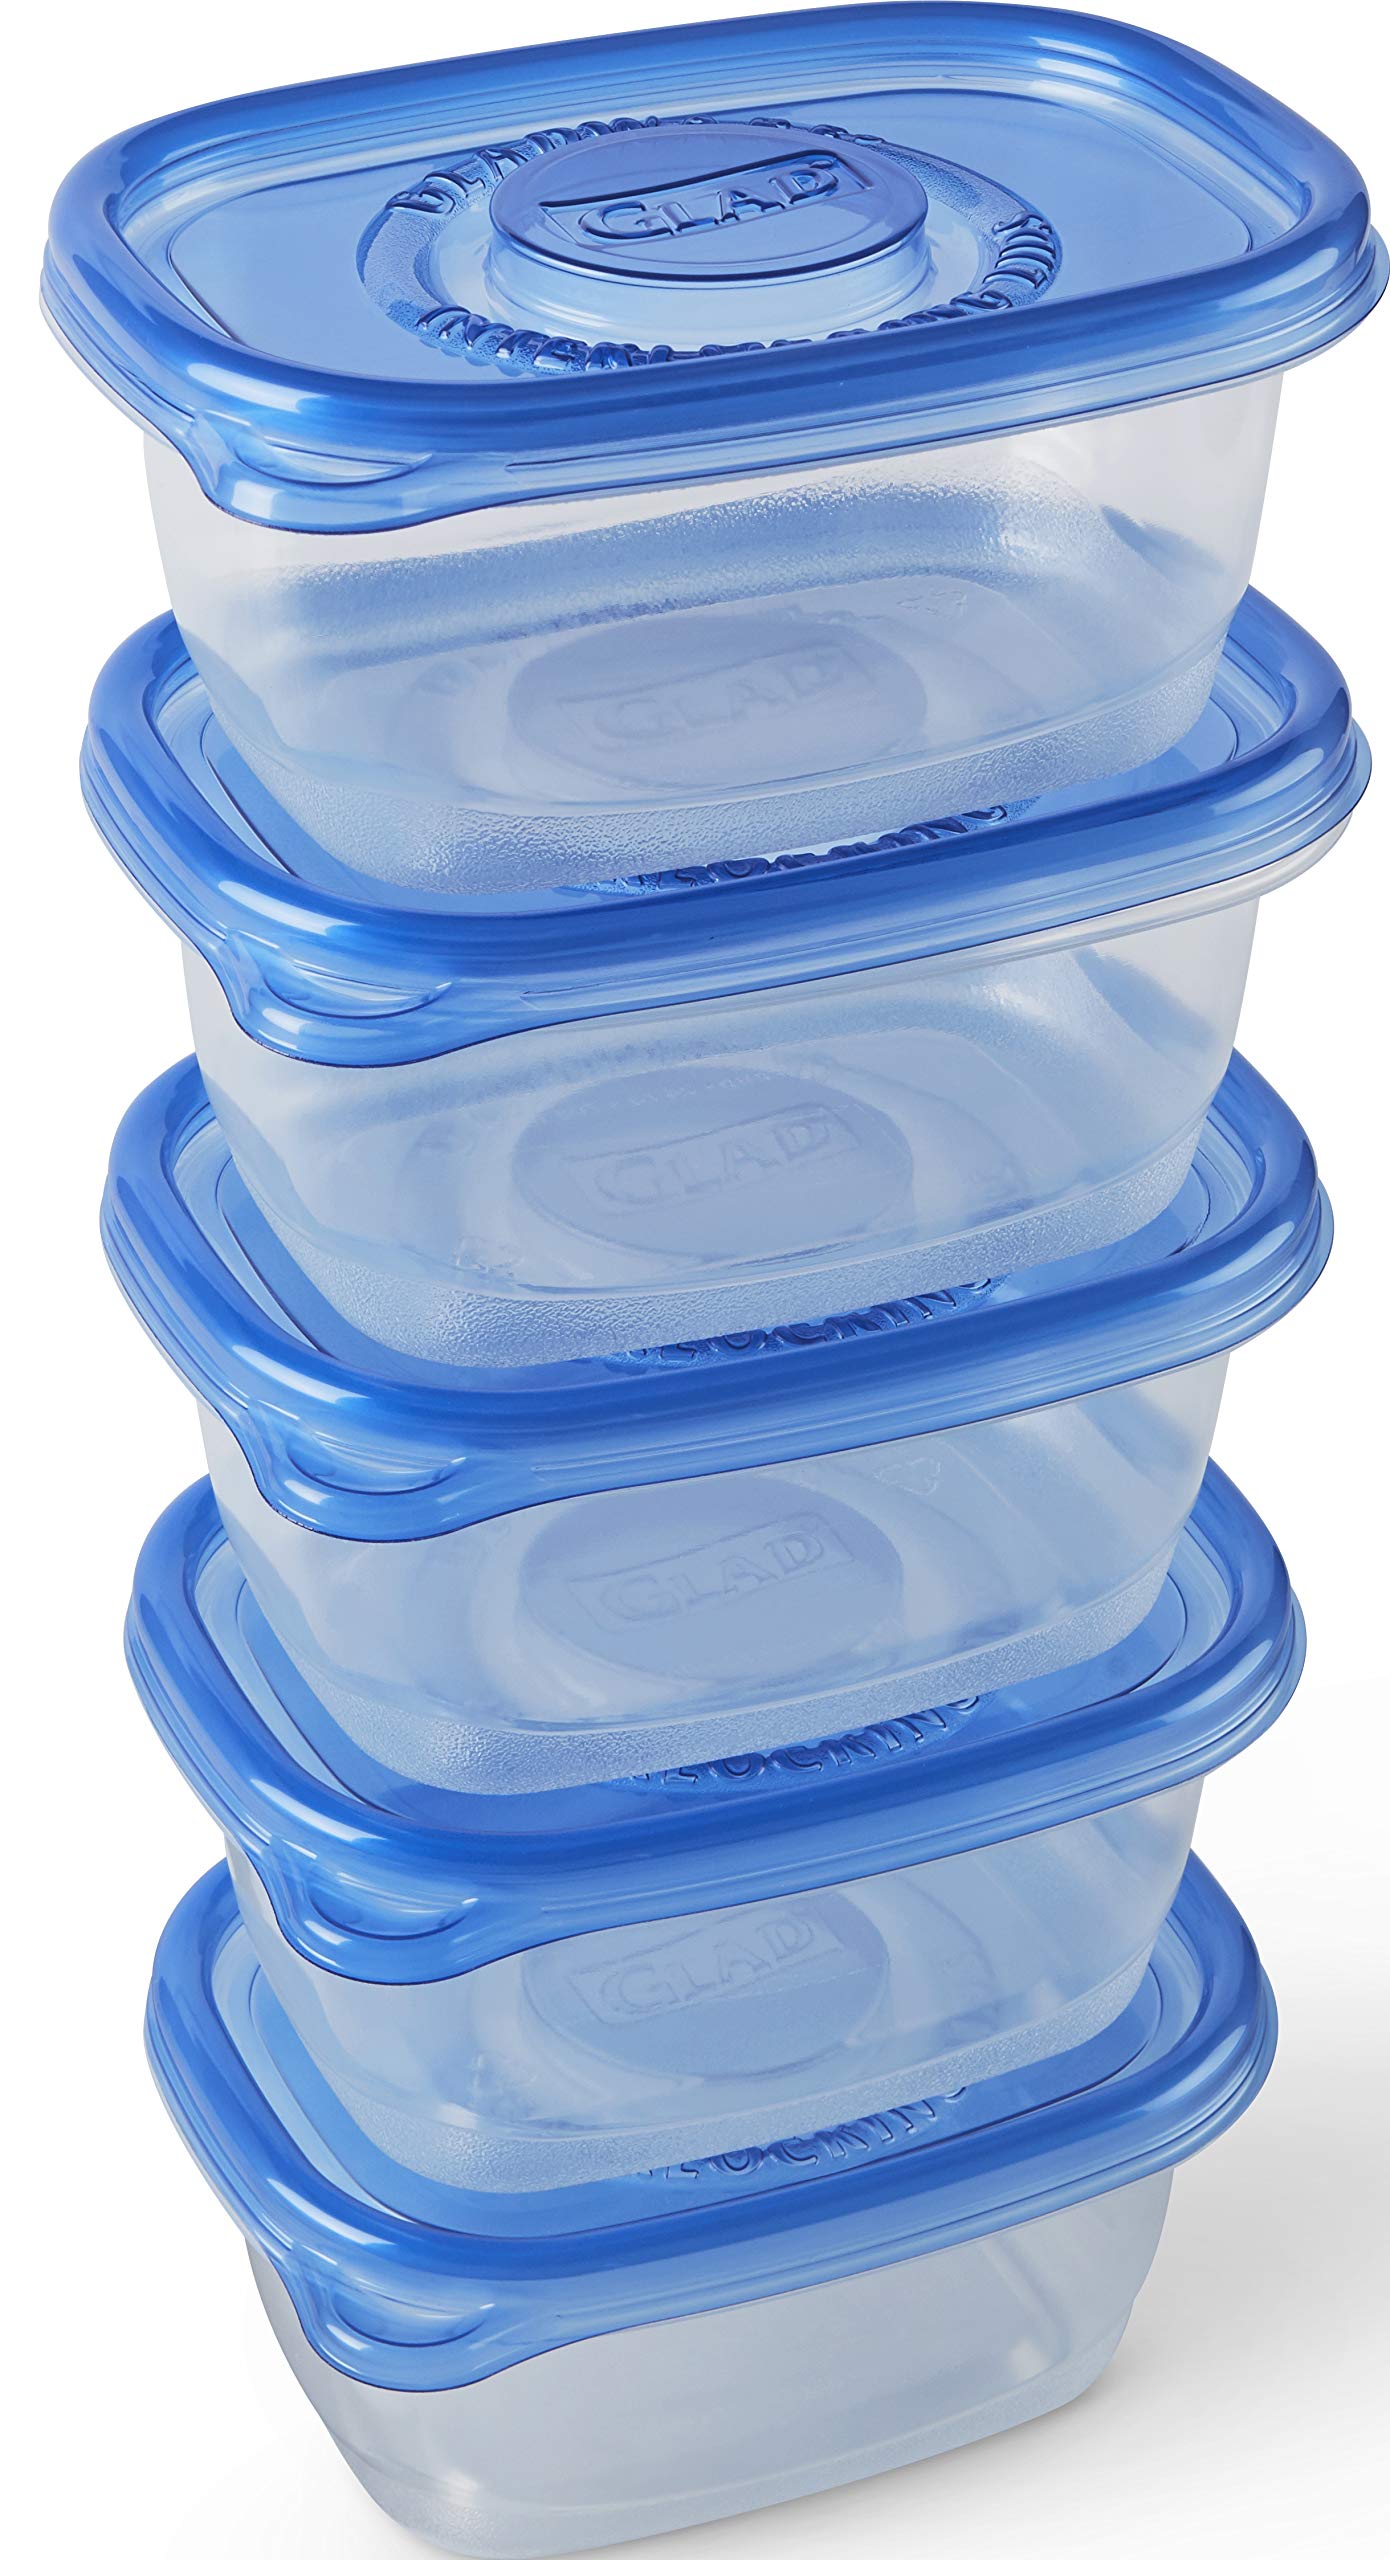 5-Pack 24-Oz GladWare Rectangle Soup & Salad Food Storage Containers (Medium) $3.41 + Free Shipping w/ Prime or on $35+